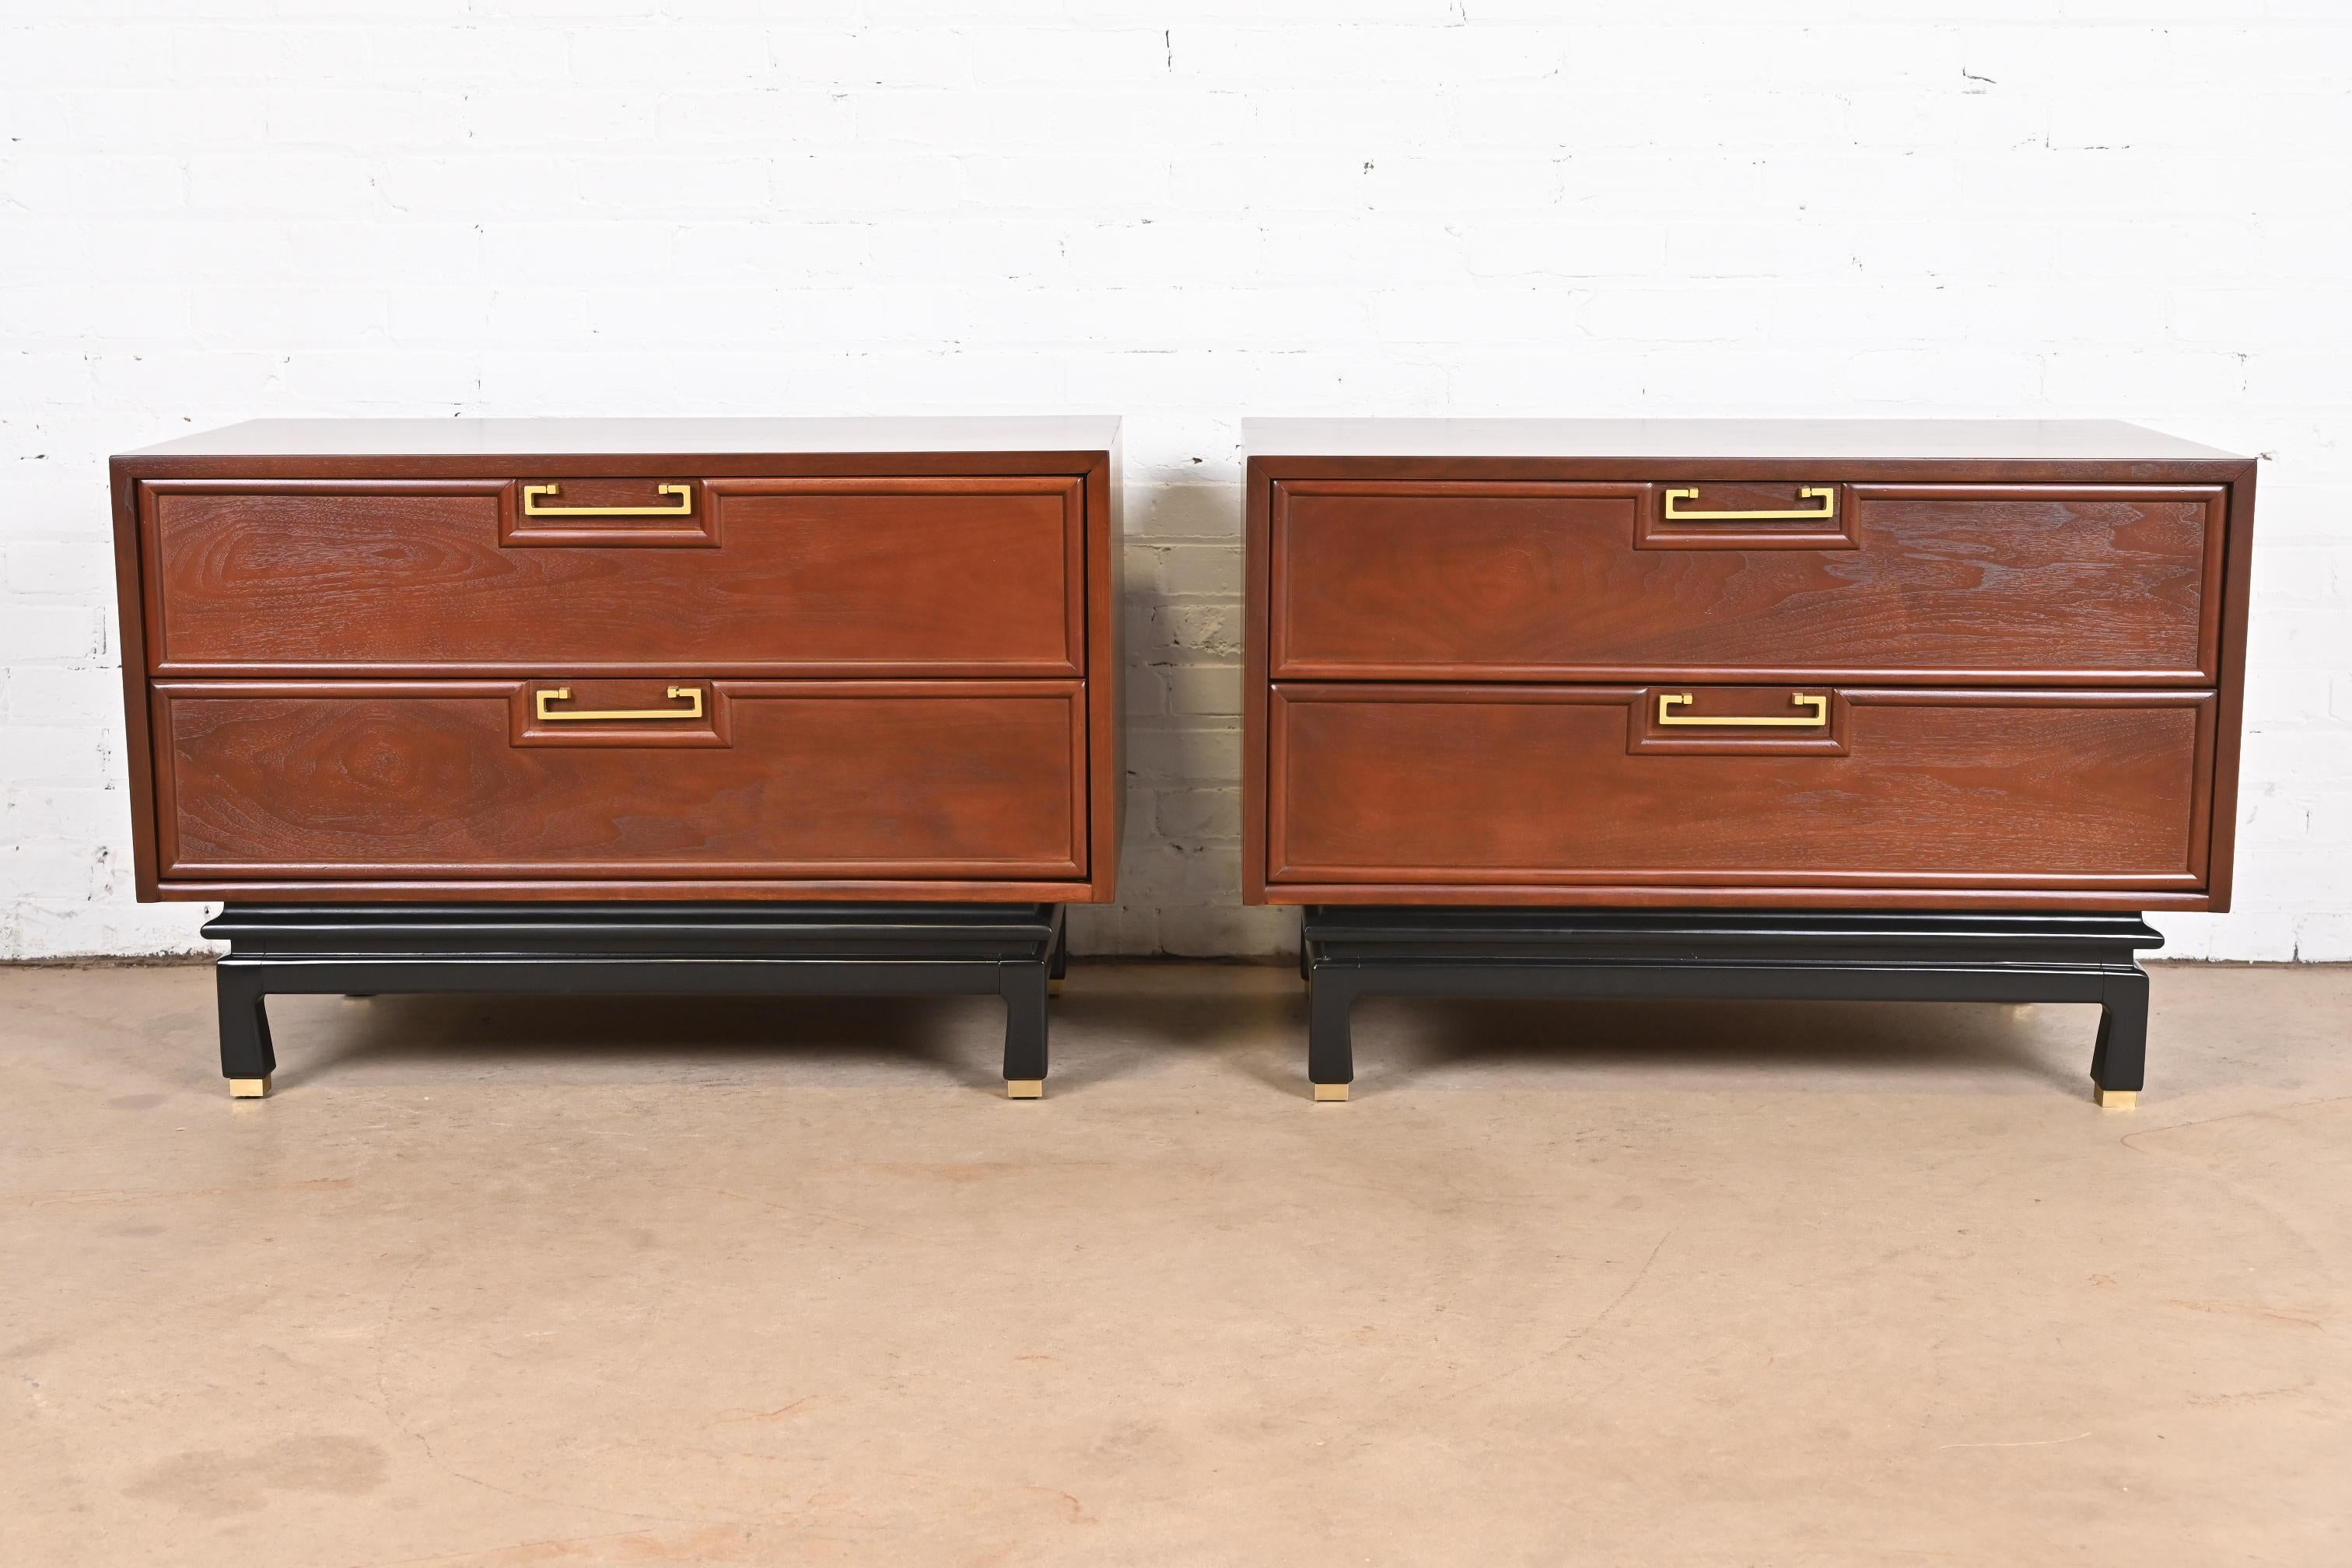 An exceptional pair of mid-century modern Hollywood Regency Chinoiserie chests of drawers or nightstands

By Merton Gershun for American of Martinsville

USA, 1960s

Walnut, with black lacquered legs, original Asian-inspired brass hardware, and